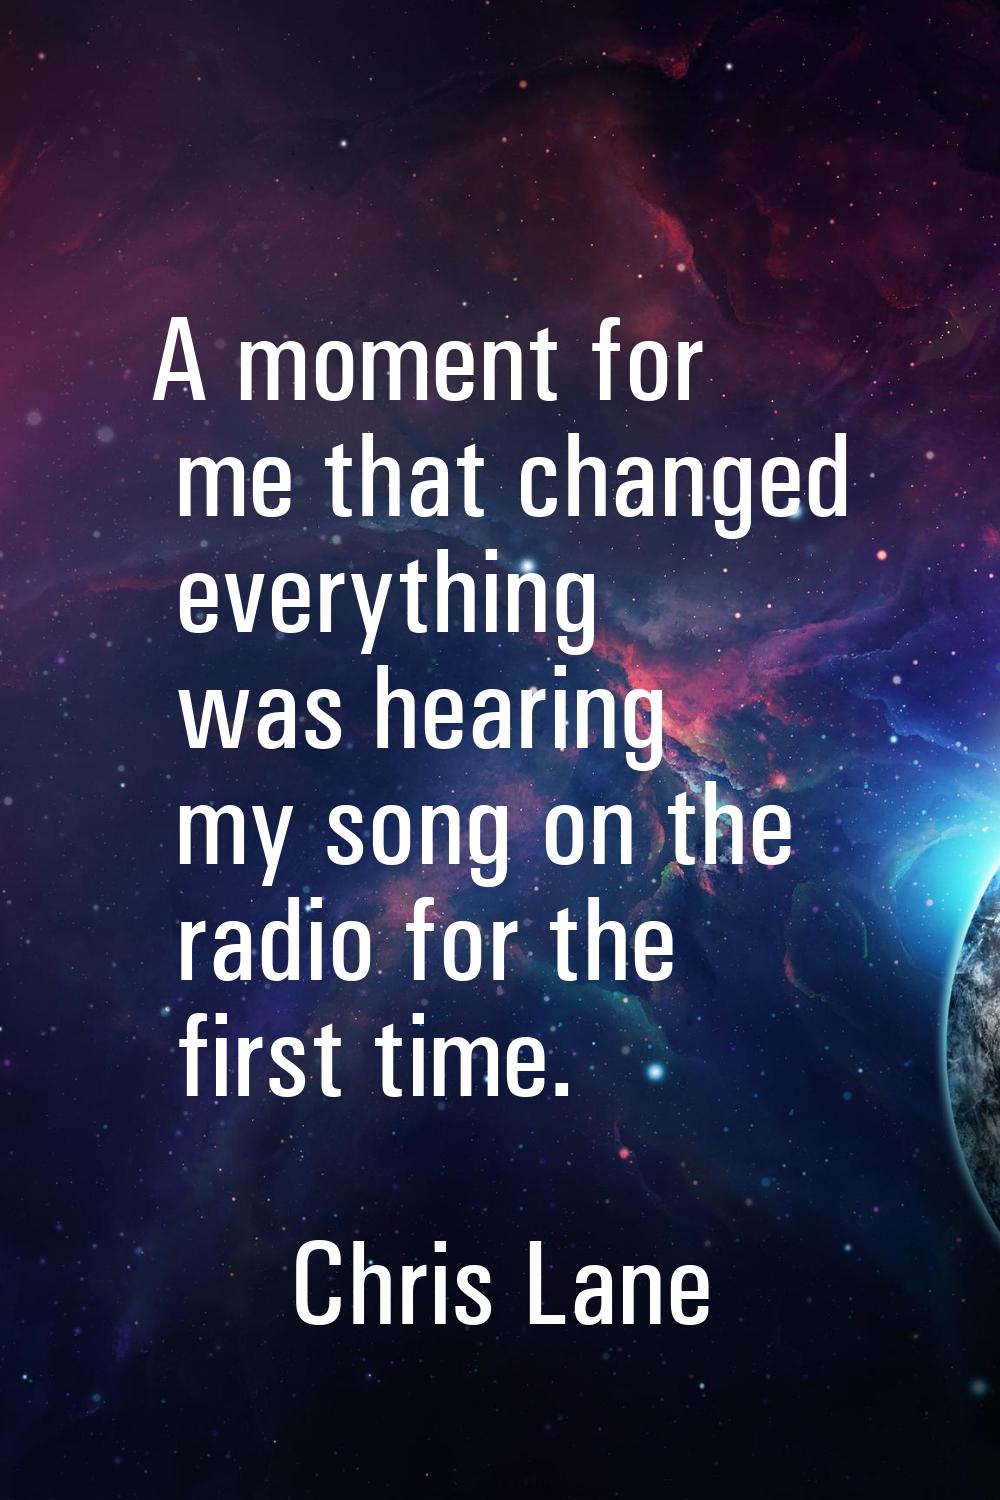 A moment for me that changed everything was hearing my song on the radio for the first time.